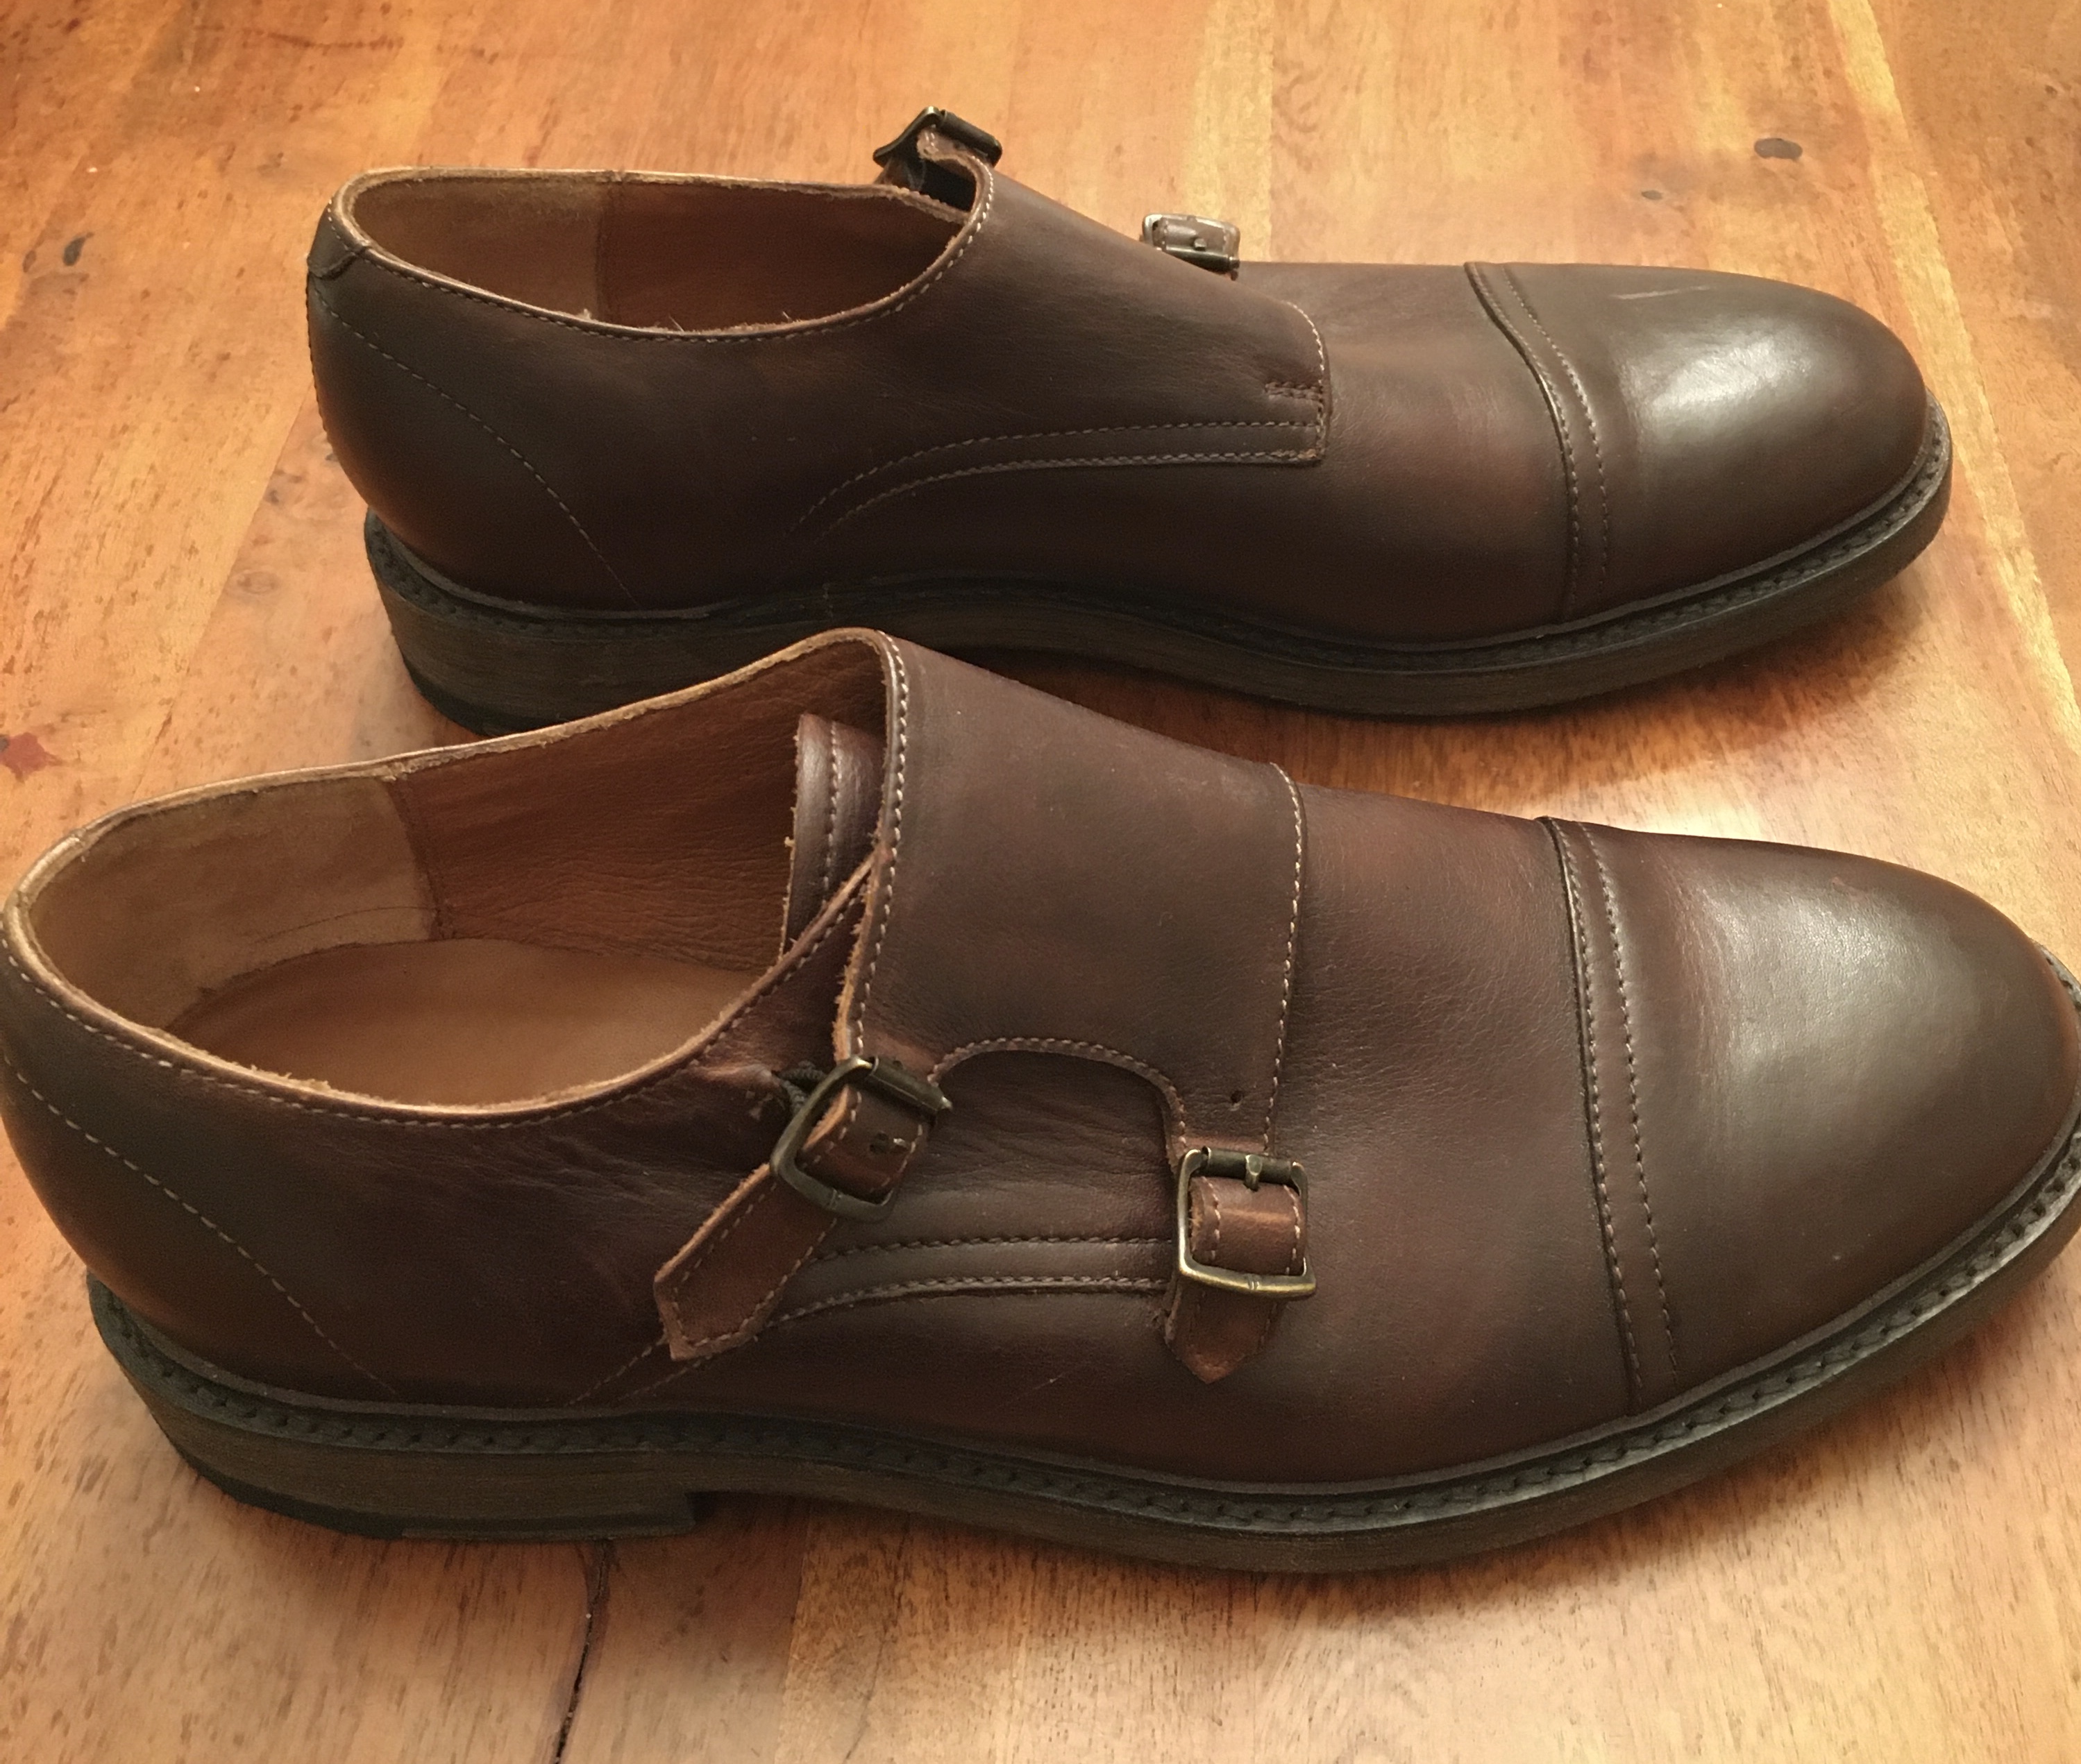 FRYE dress shoes. 8.5D. NWOT. FREE to good home | The Fedora Lounge